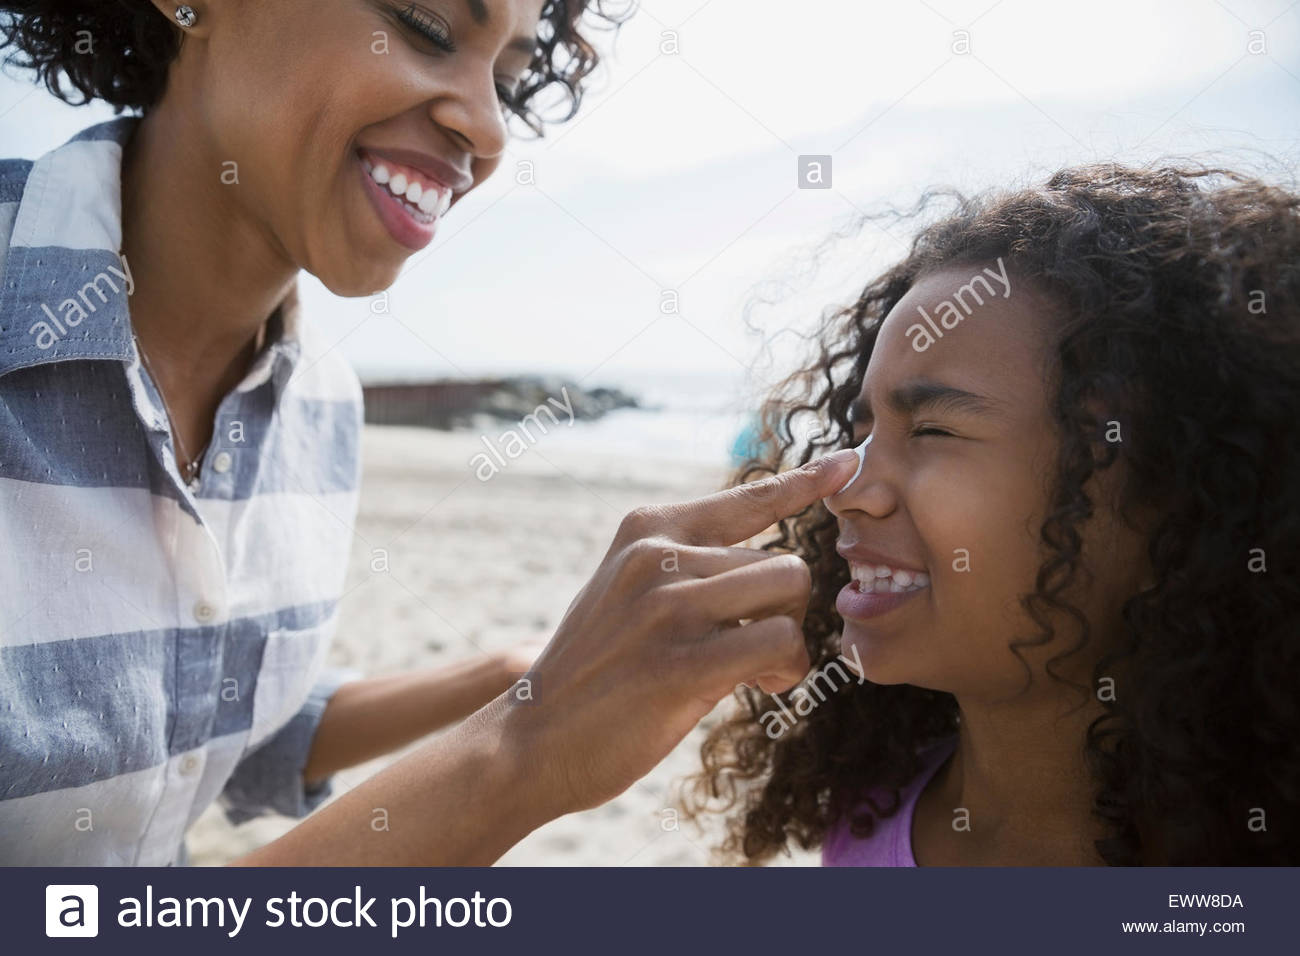 Mother applying sunscreen to daughter nose Stock Photo